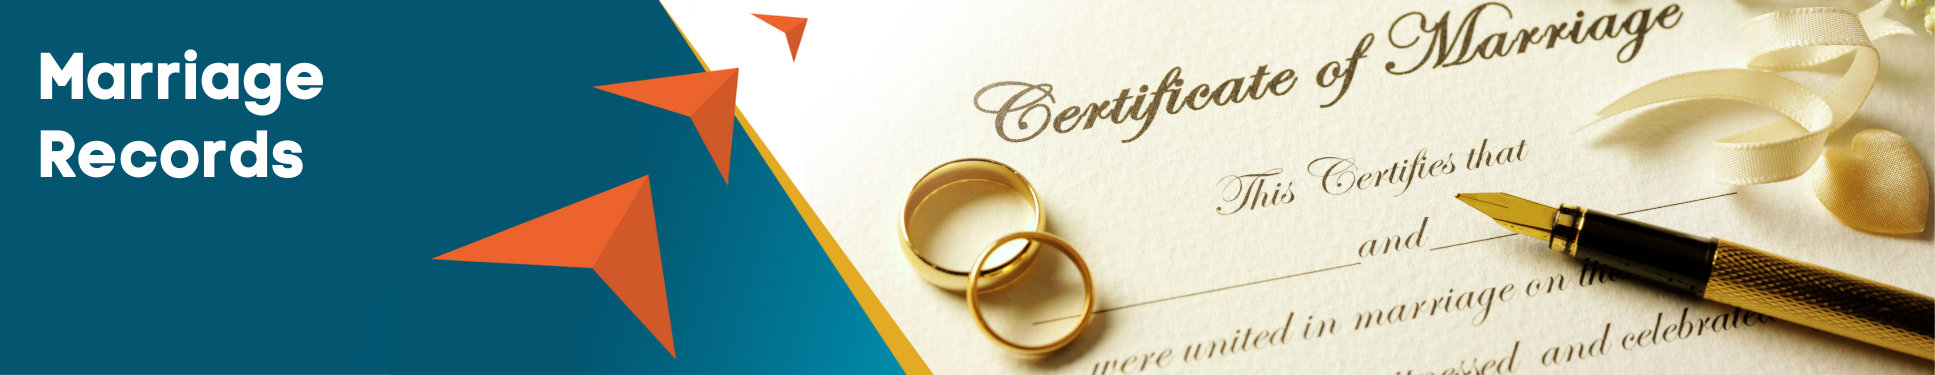 Marriage Records banner with three orange arrows pointing to a marriage certificate with two rings and pen.